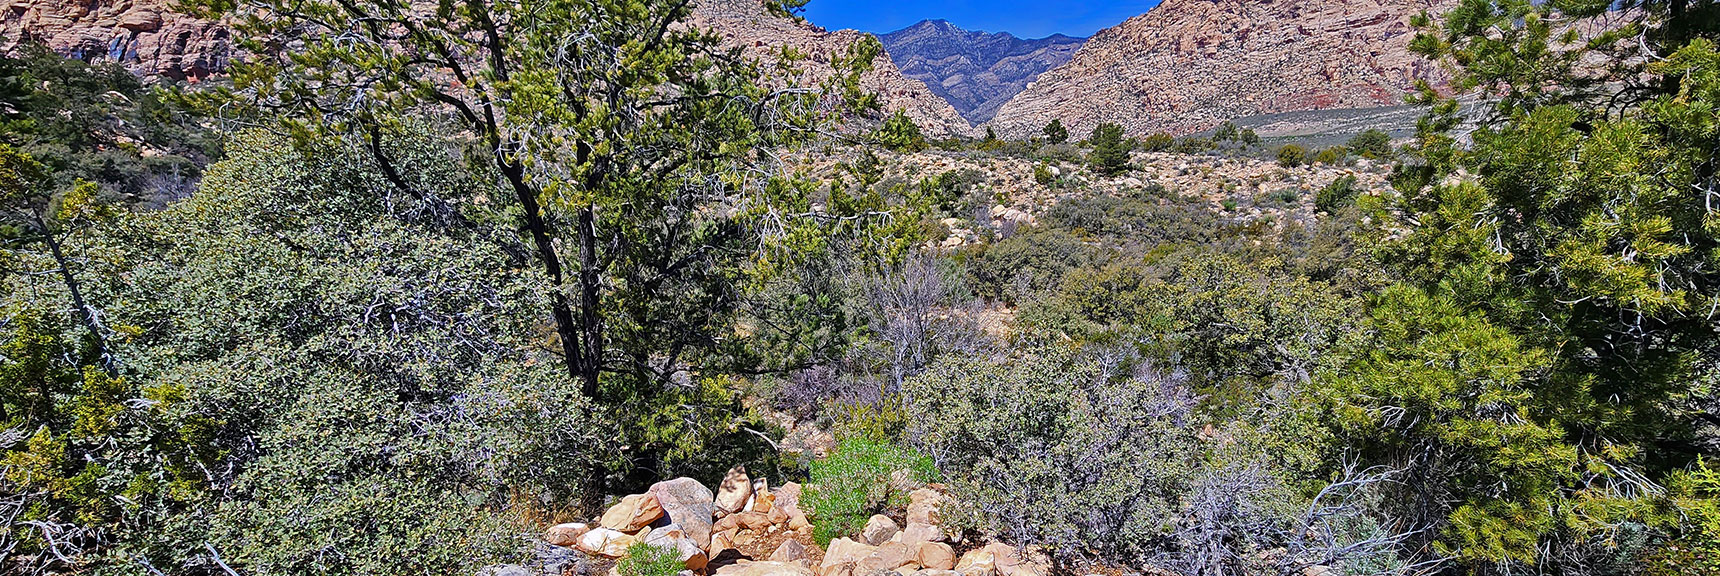 View Across Ice Box Canyon. Trail Momentarily Disappears Near Creek, Then Reappears on North Side. | Dales Trail | Red Rock Canyon National Conservation Area, Nevada | David Smith | LasVegasAreaTrails.com